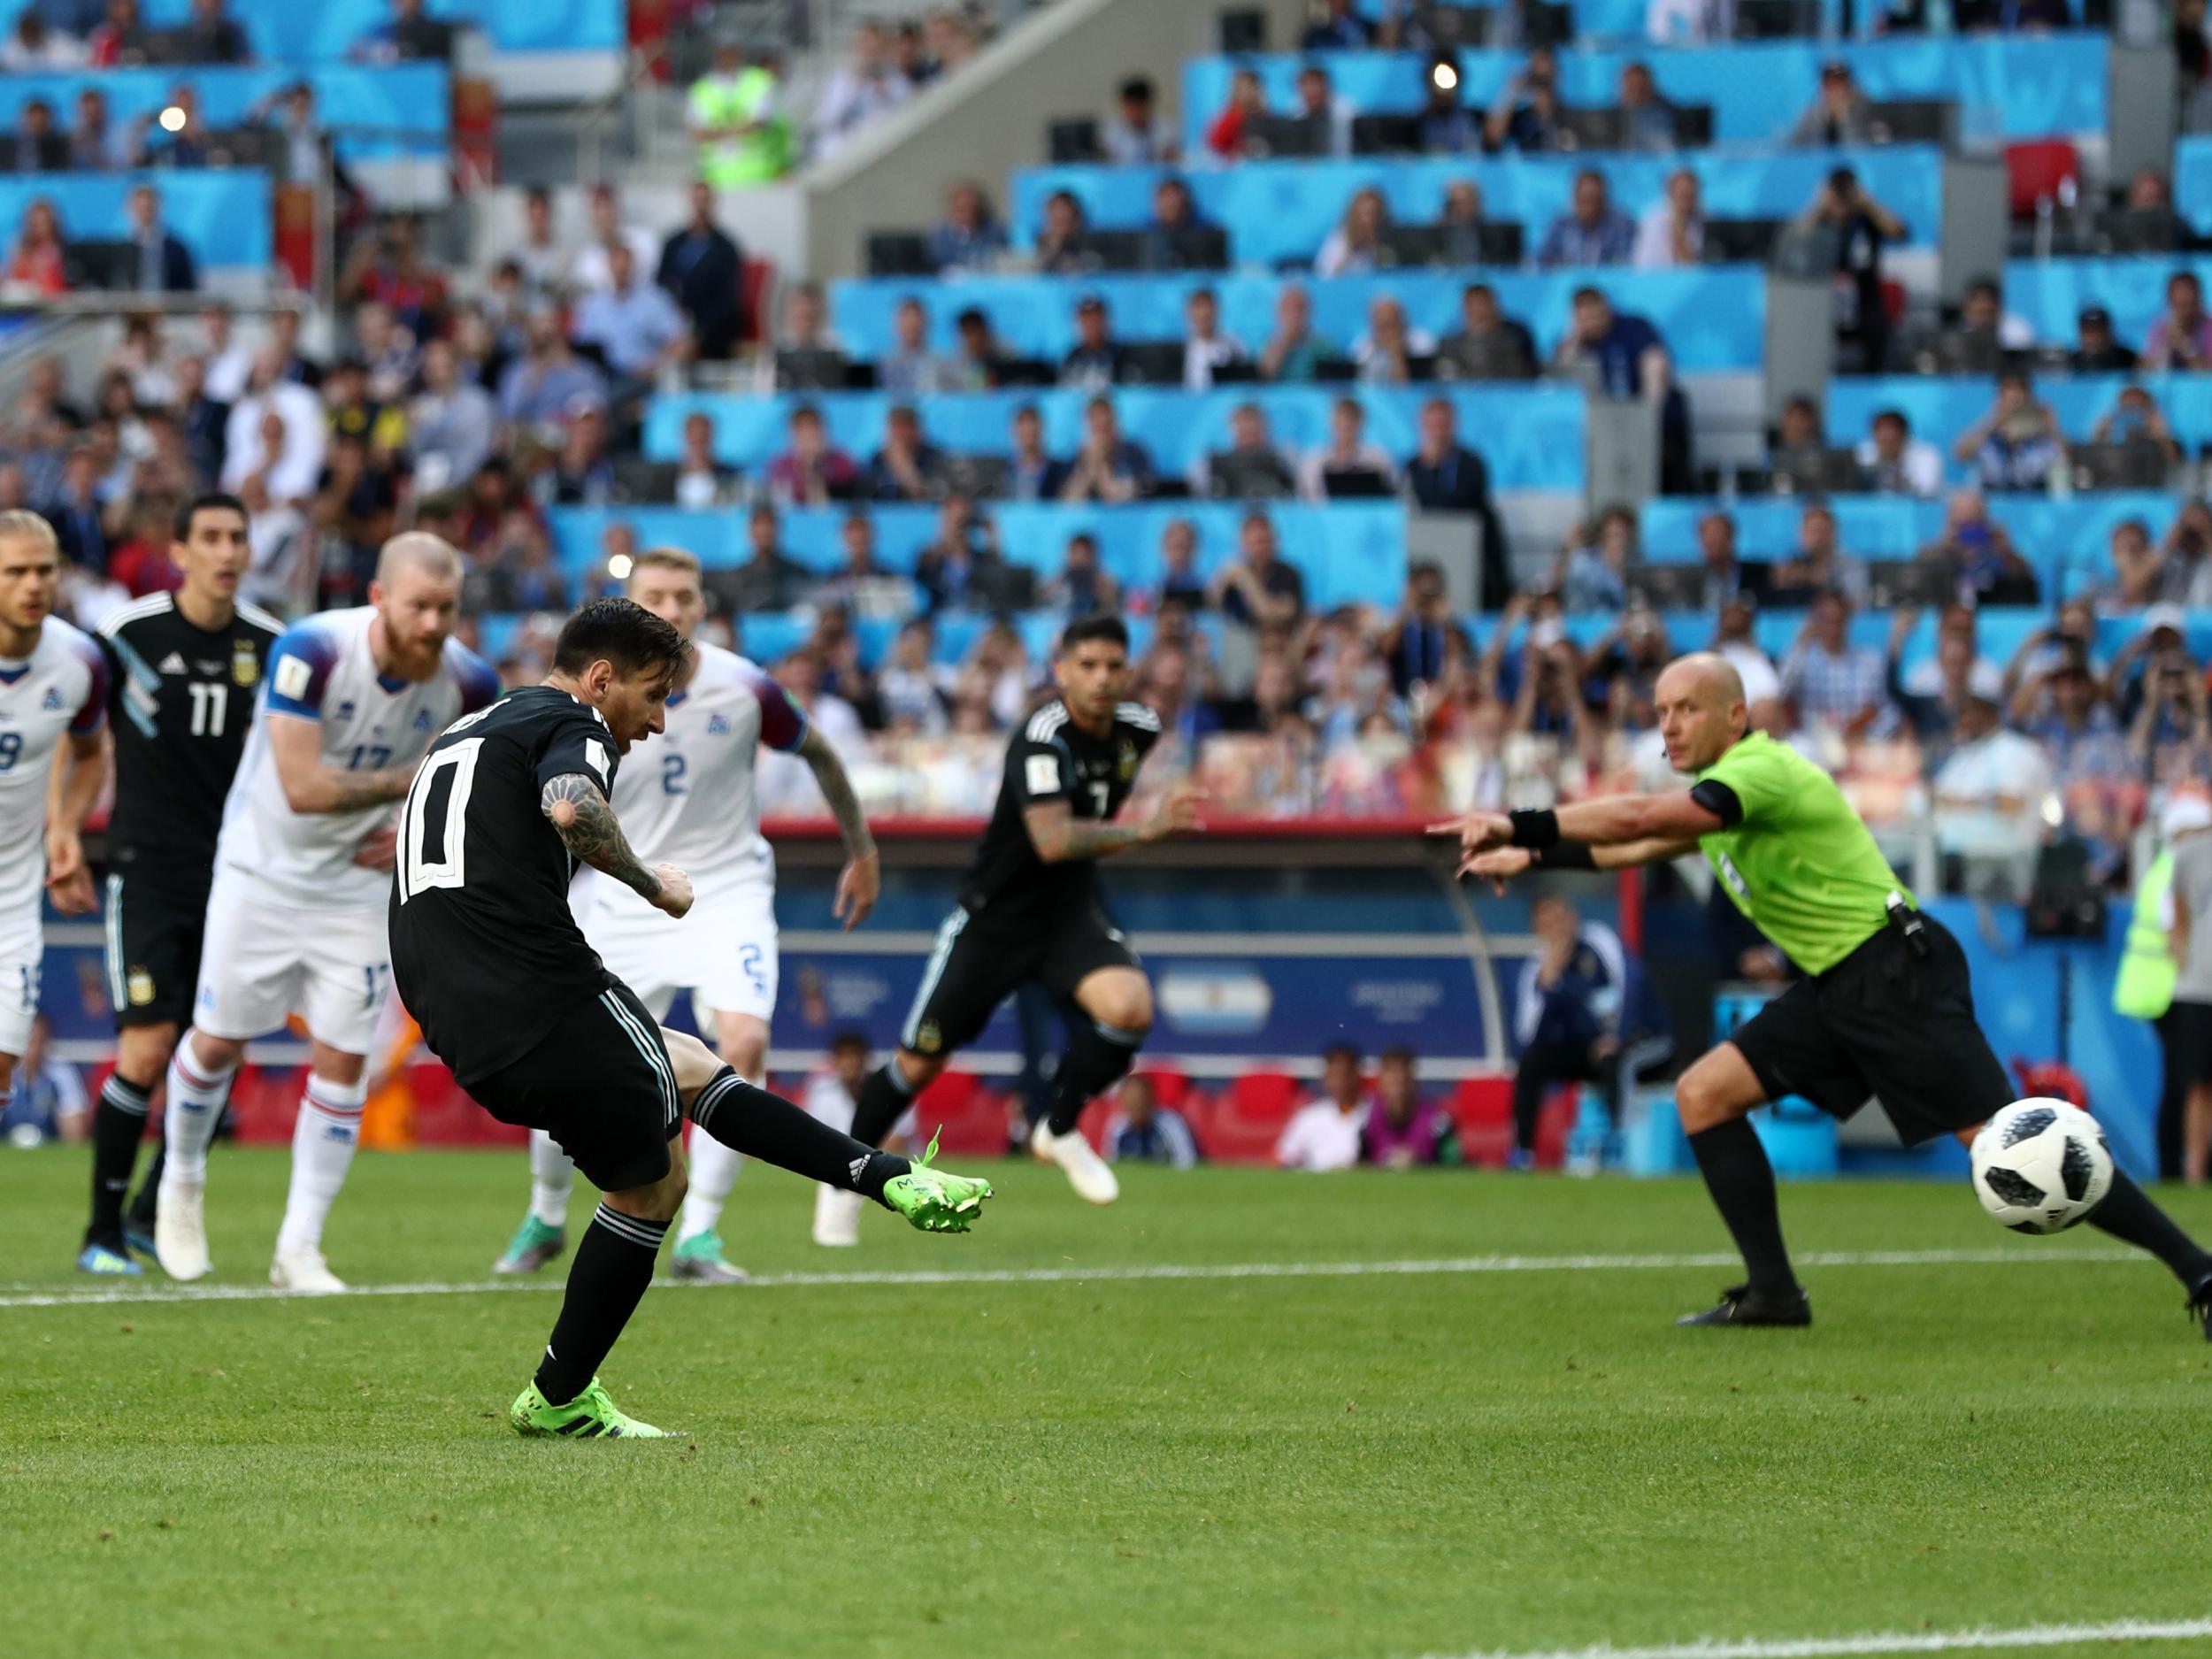 Messi's spot-kick effort was saved by Iceland's goalkeeper